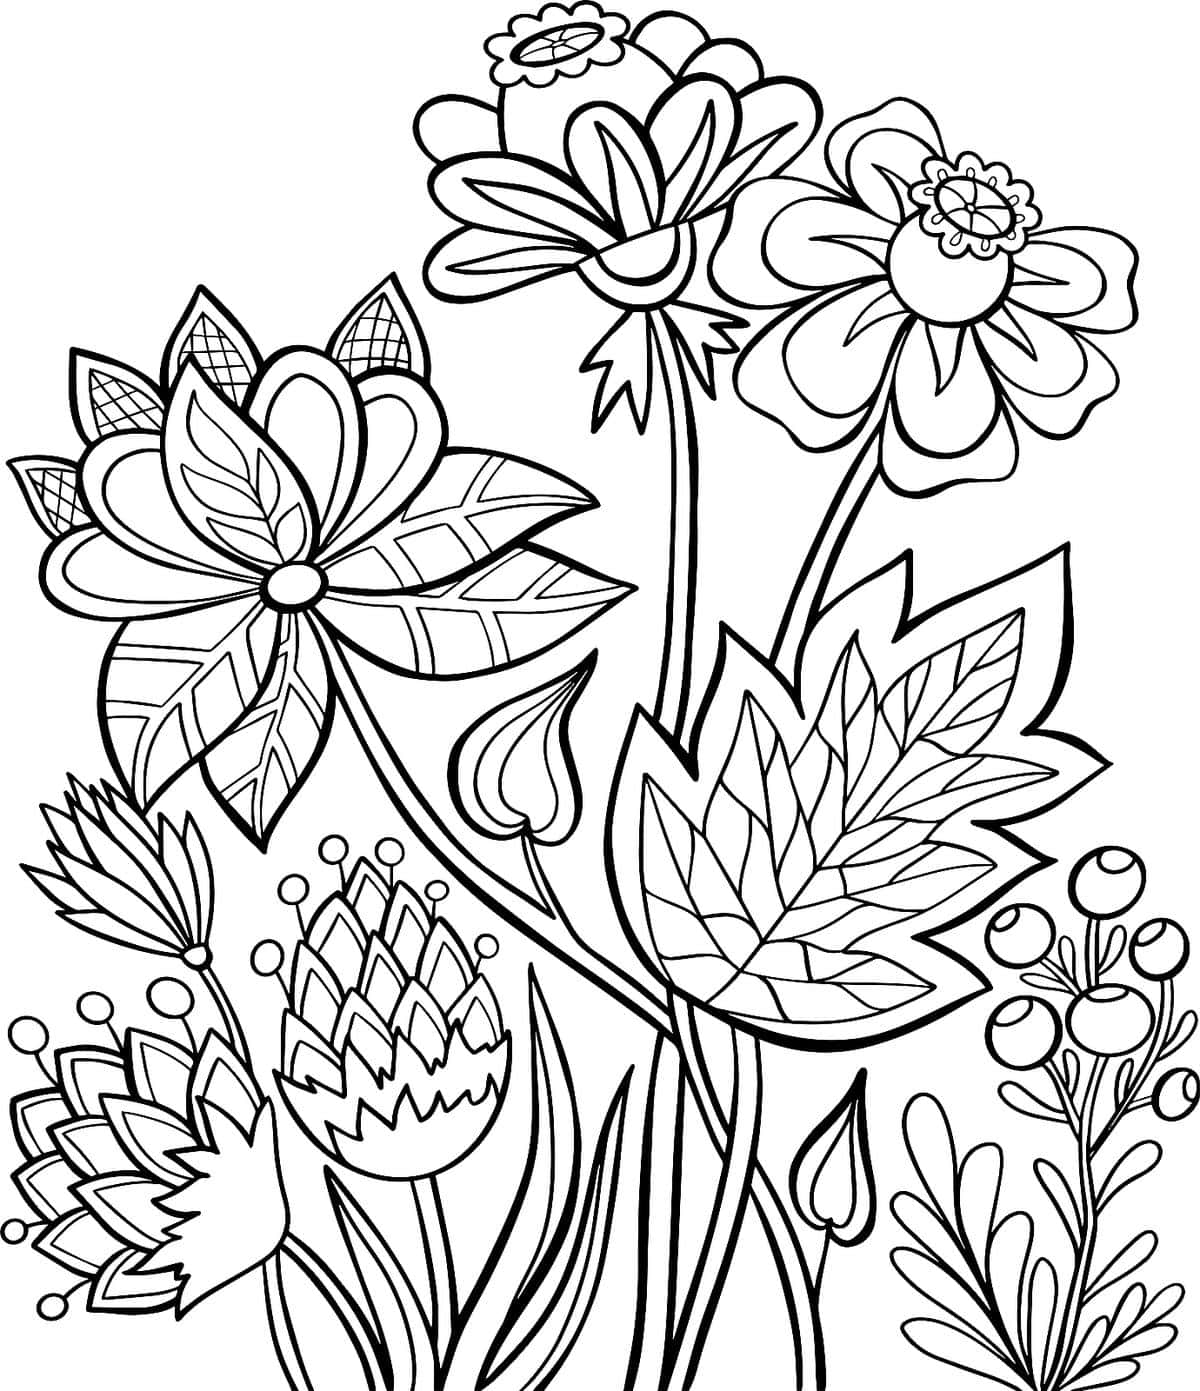 A Coloring Page With Flowers And Leaves